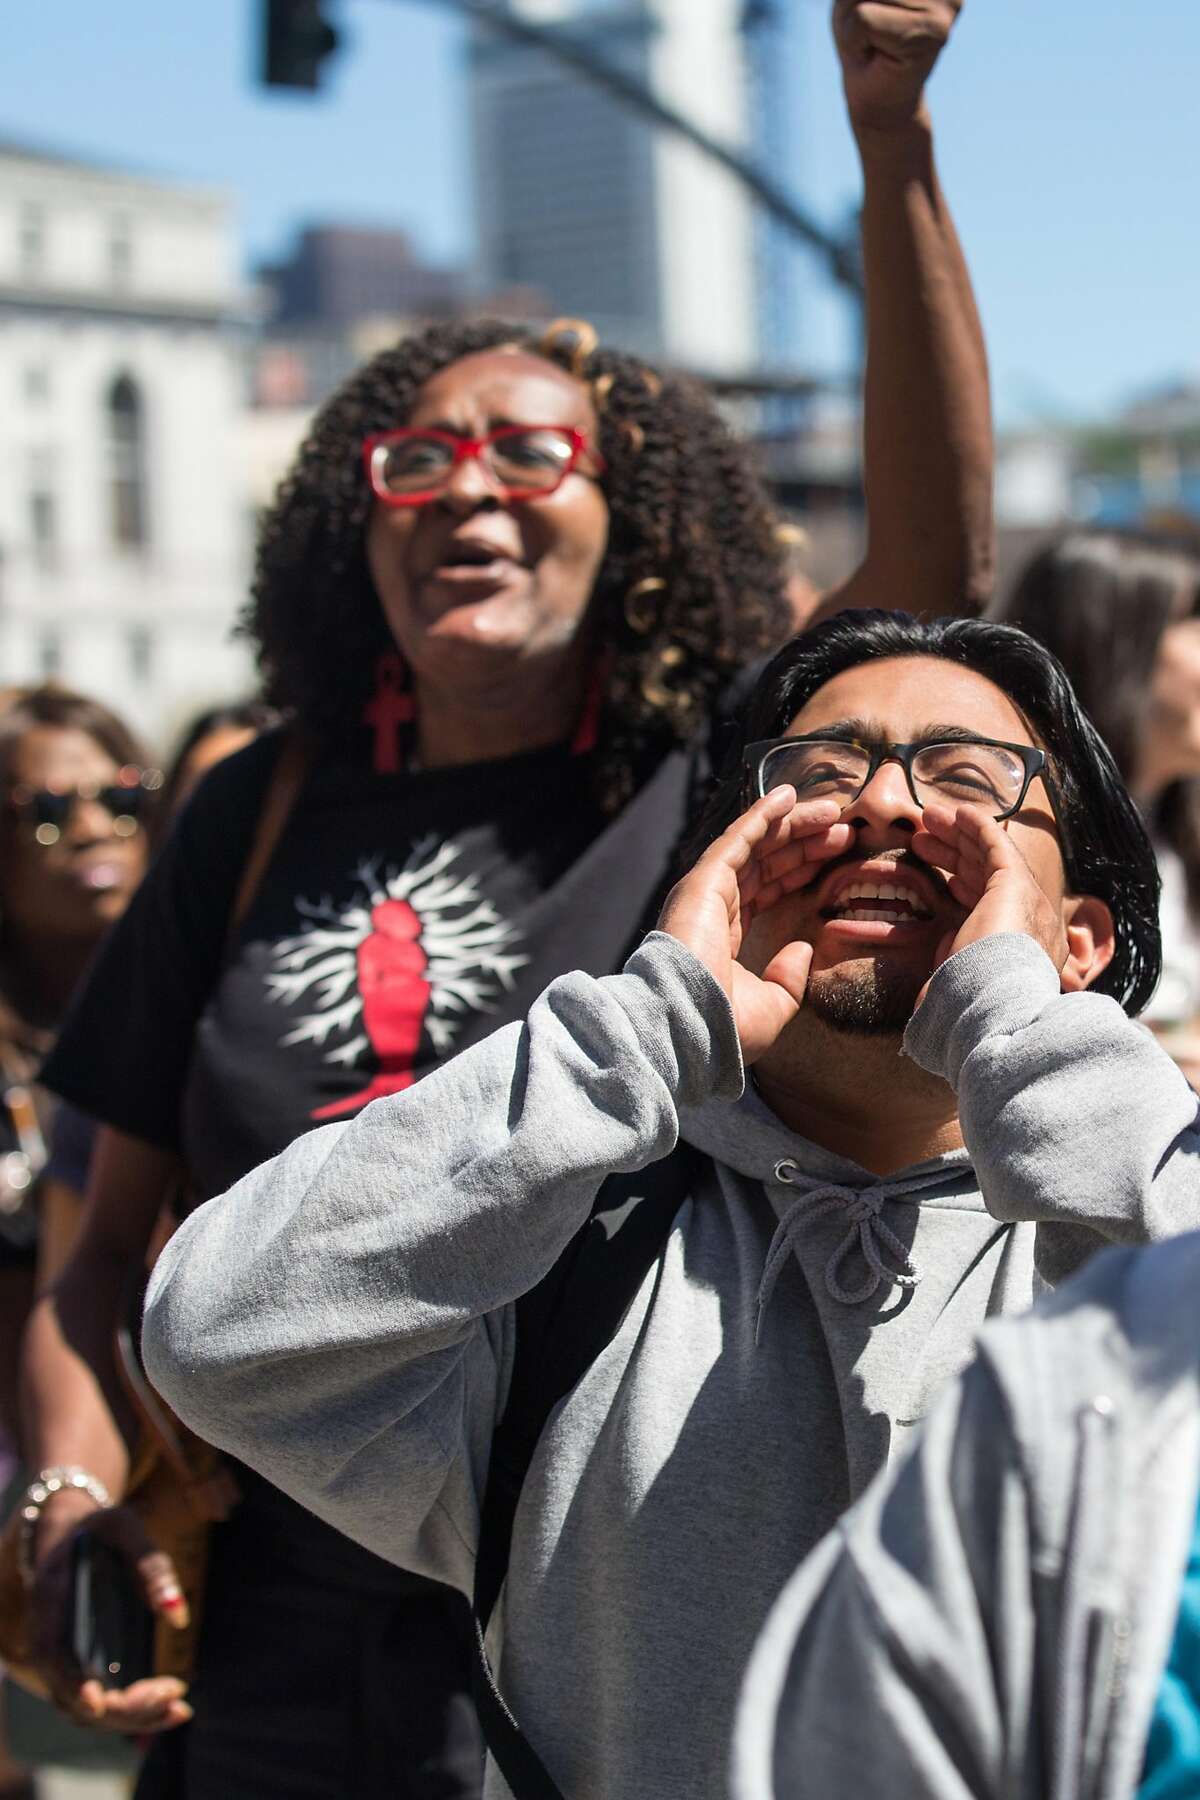 Nick Derenzi, front, and Janetta Johnson take part at a rally in support of the new proposal to close San Francisco juvenile hall. On Tuesday, April 9, 2019. San Francisco, Calif.